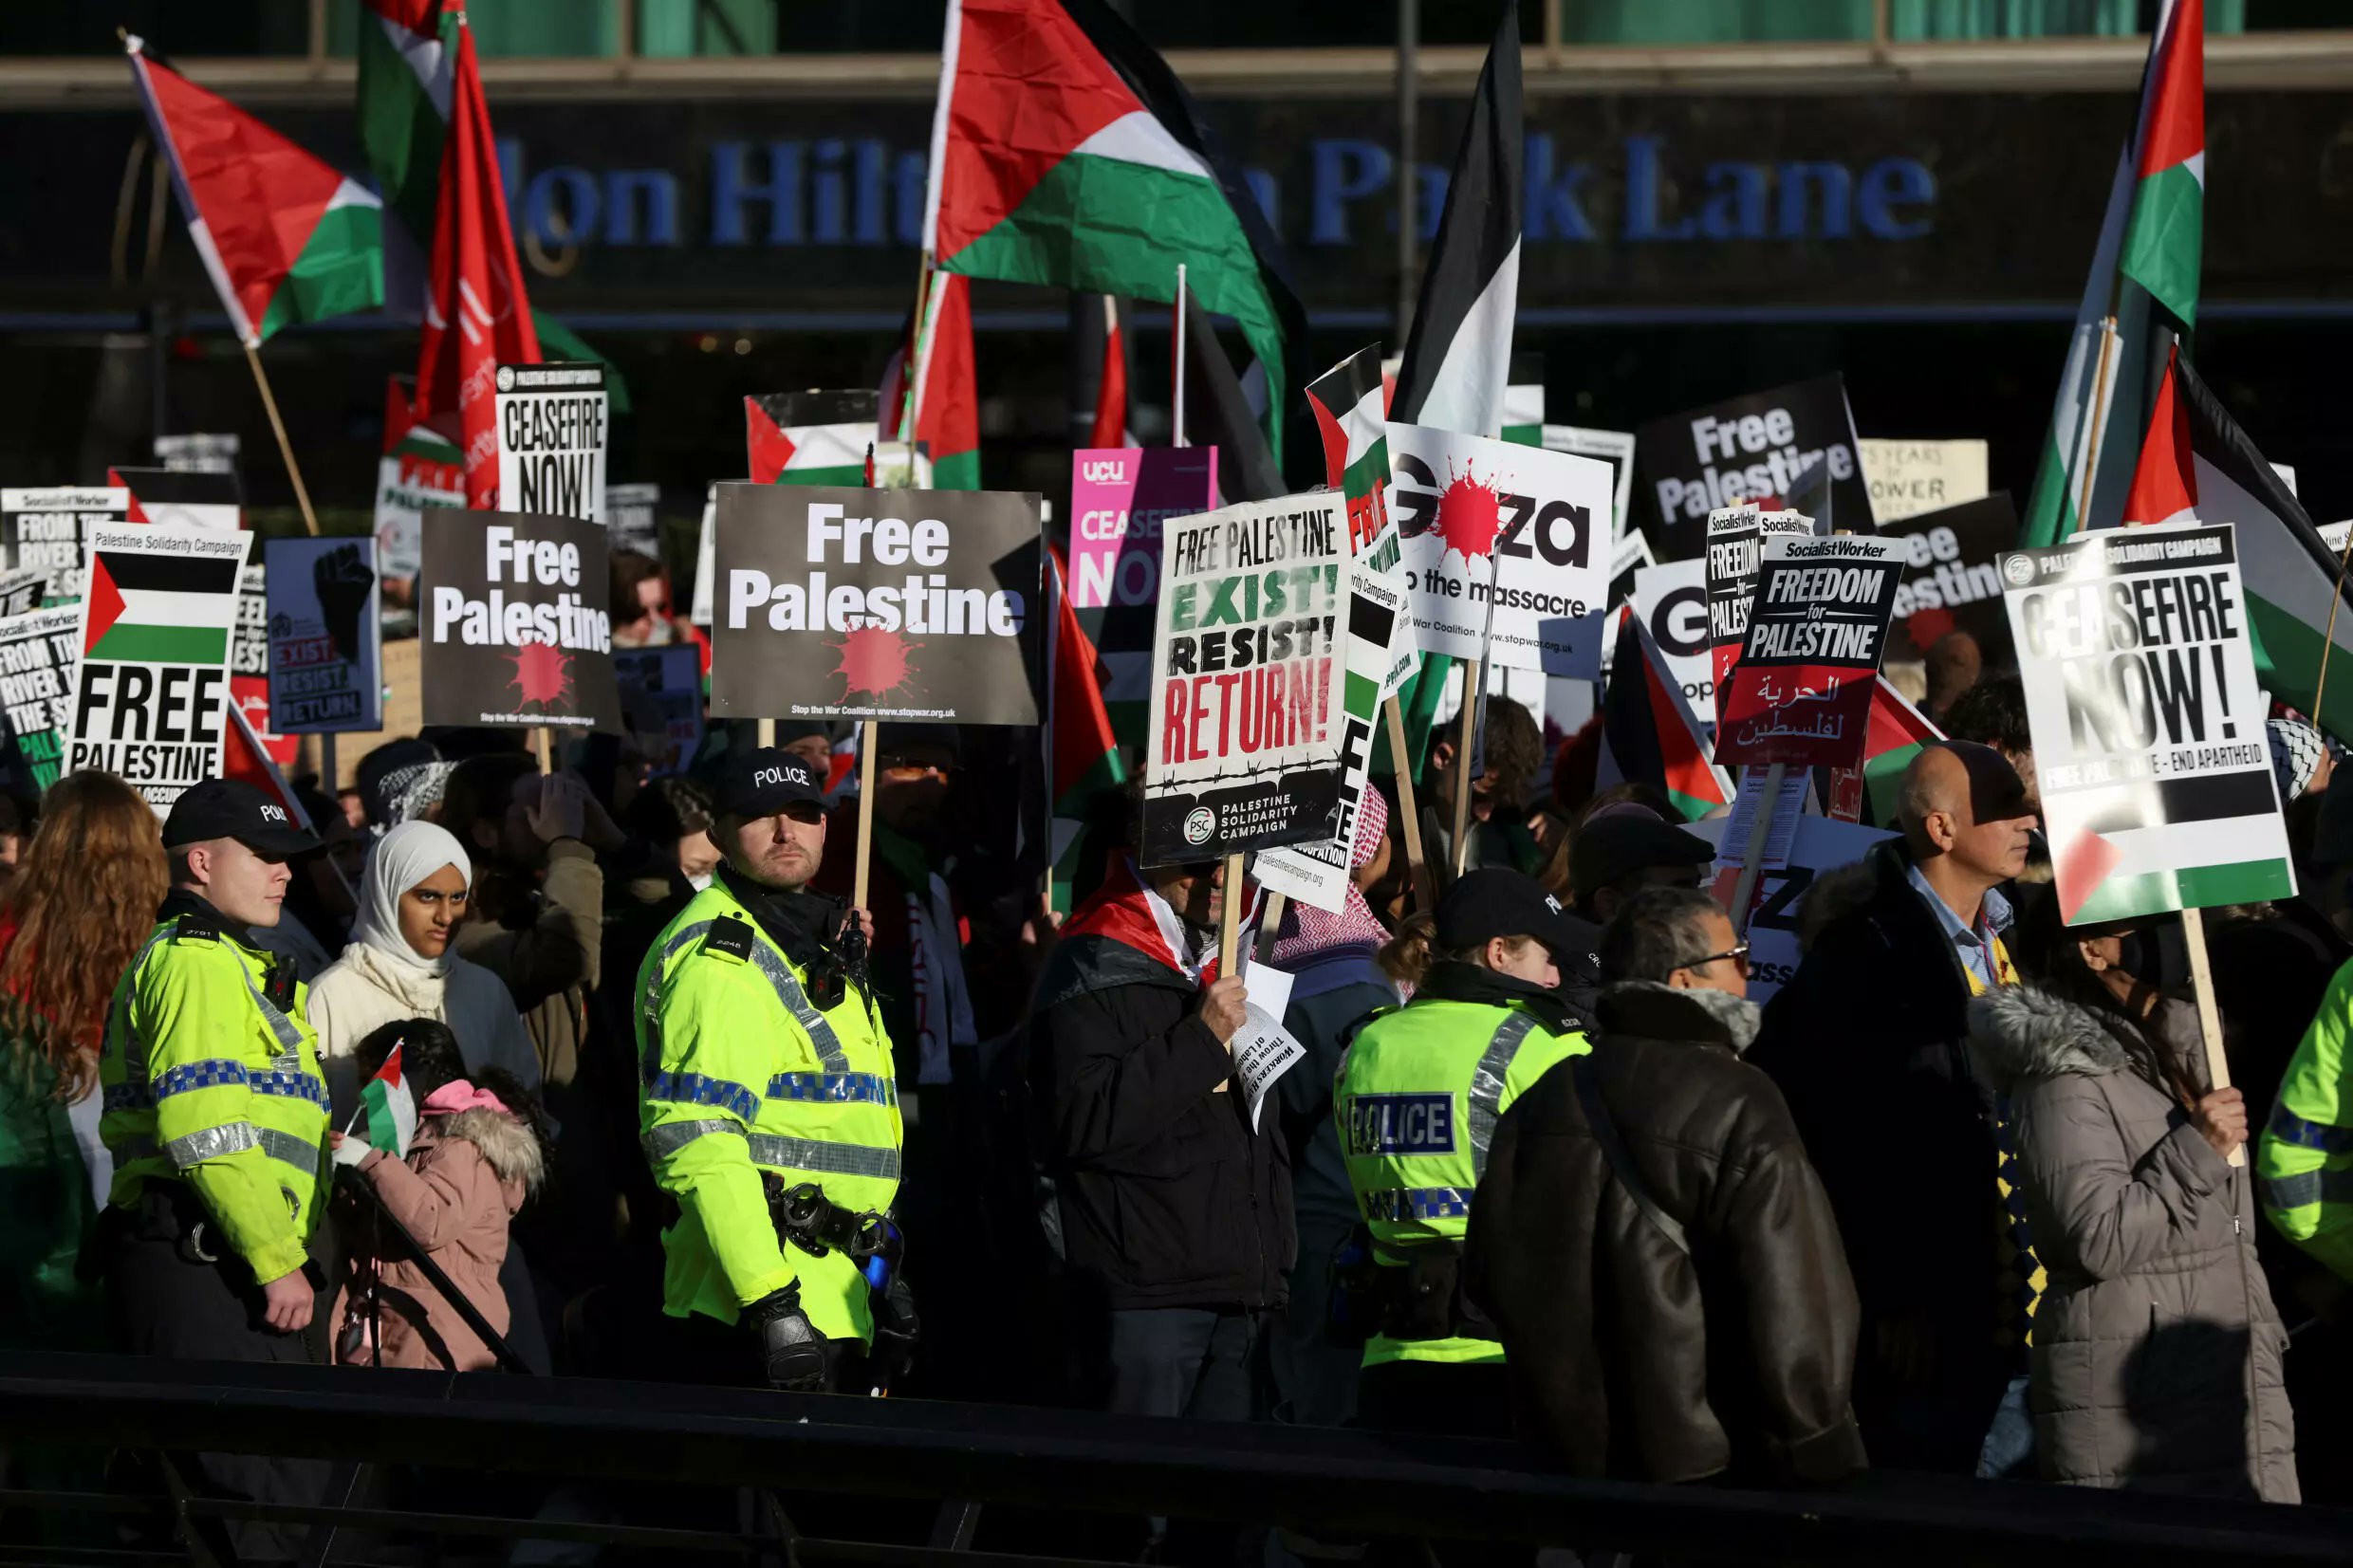 People protest in the British capital for the Palestinian peace